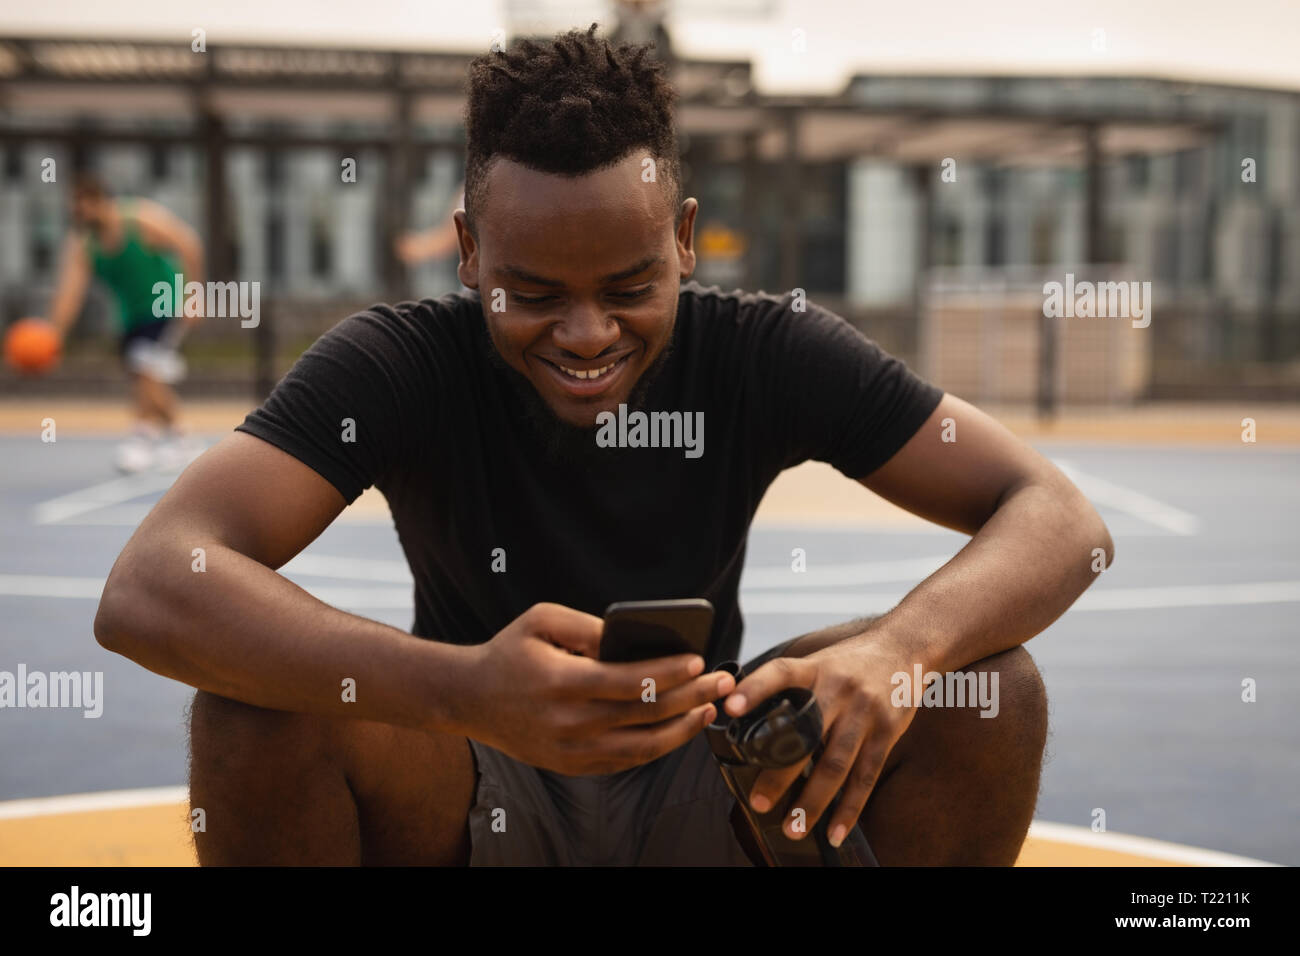 Basketball player sitting on a basketball while he is using mobile phone Stock Photo